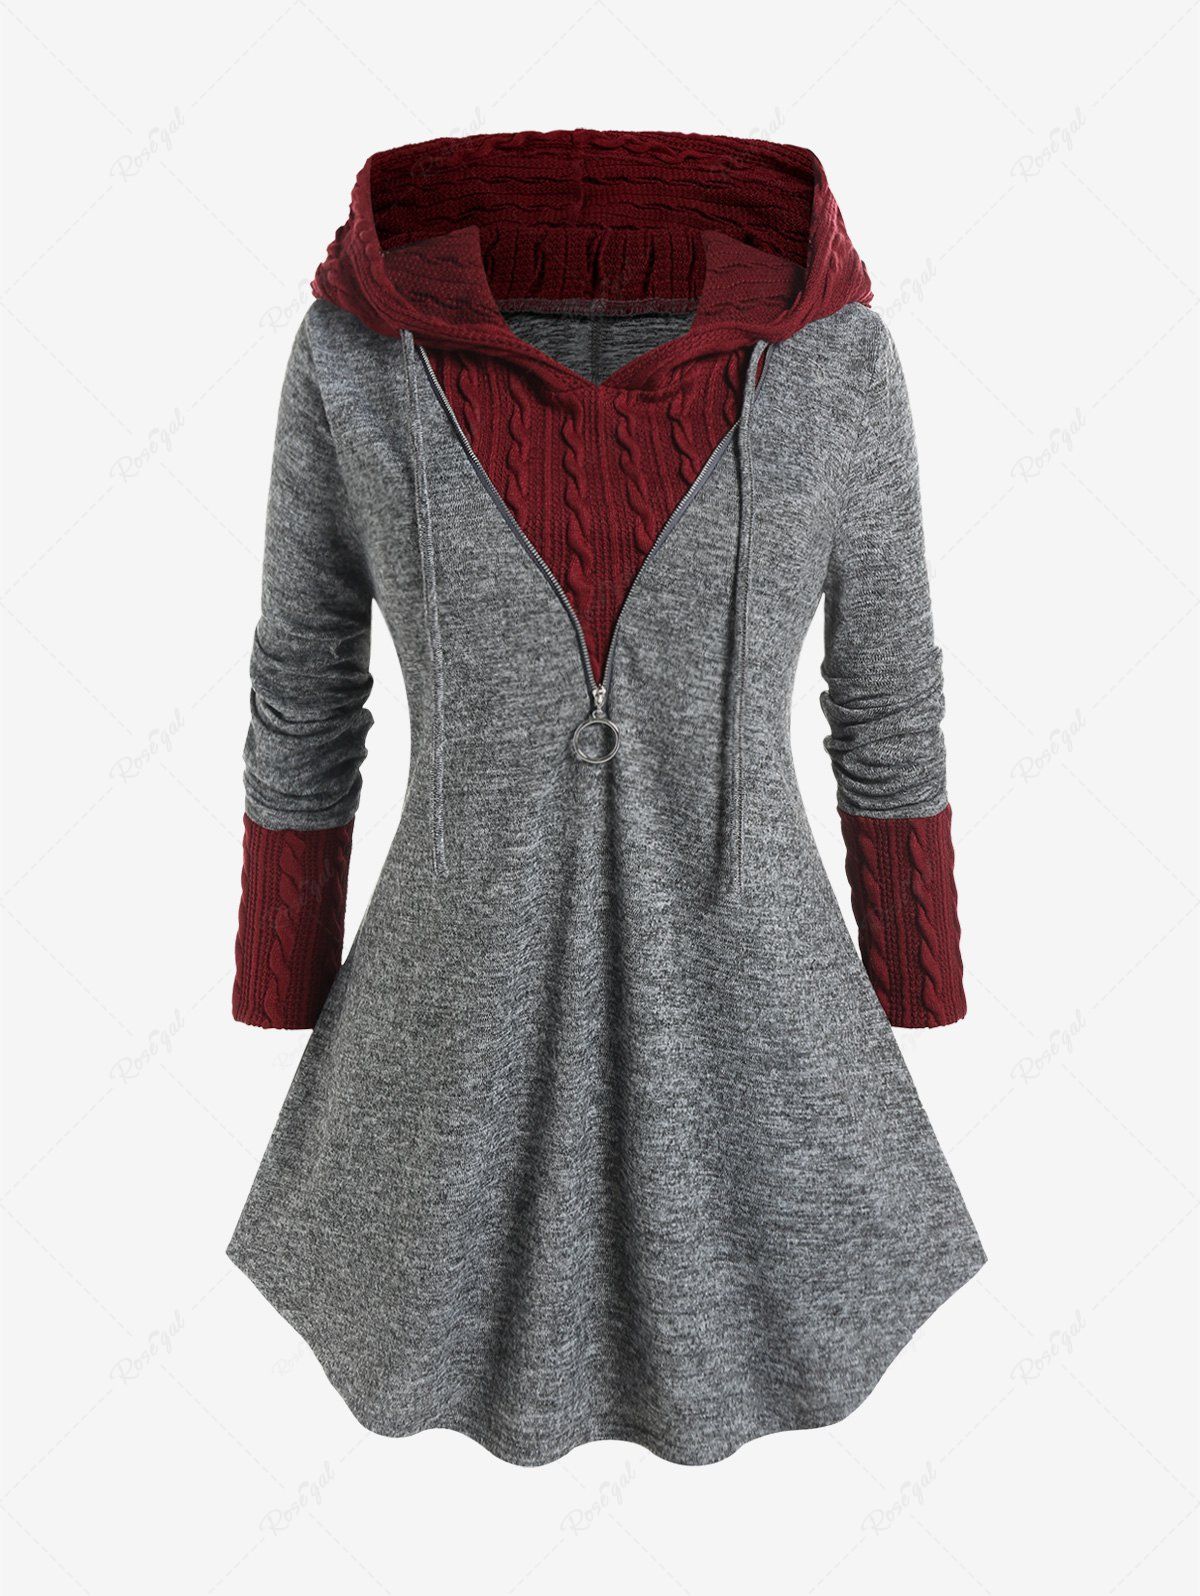 New Plus Size Hooded Drawstring Cable Knit Mixed Media Top  